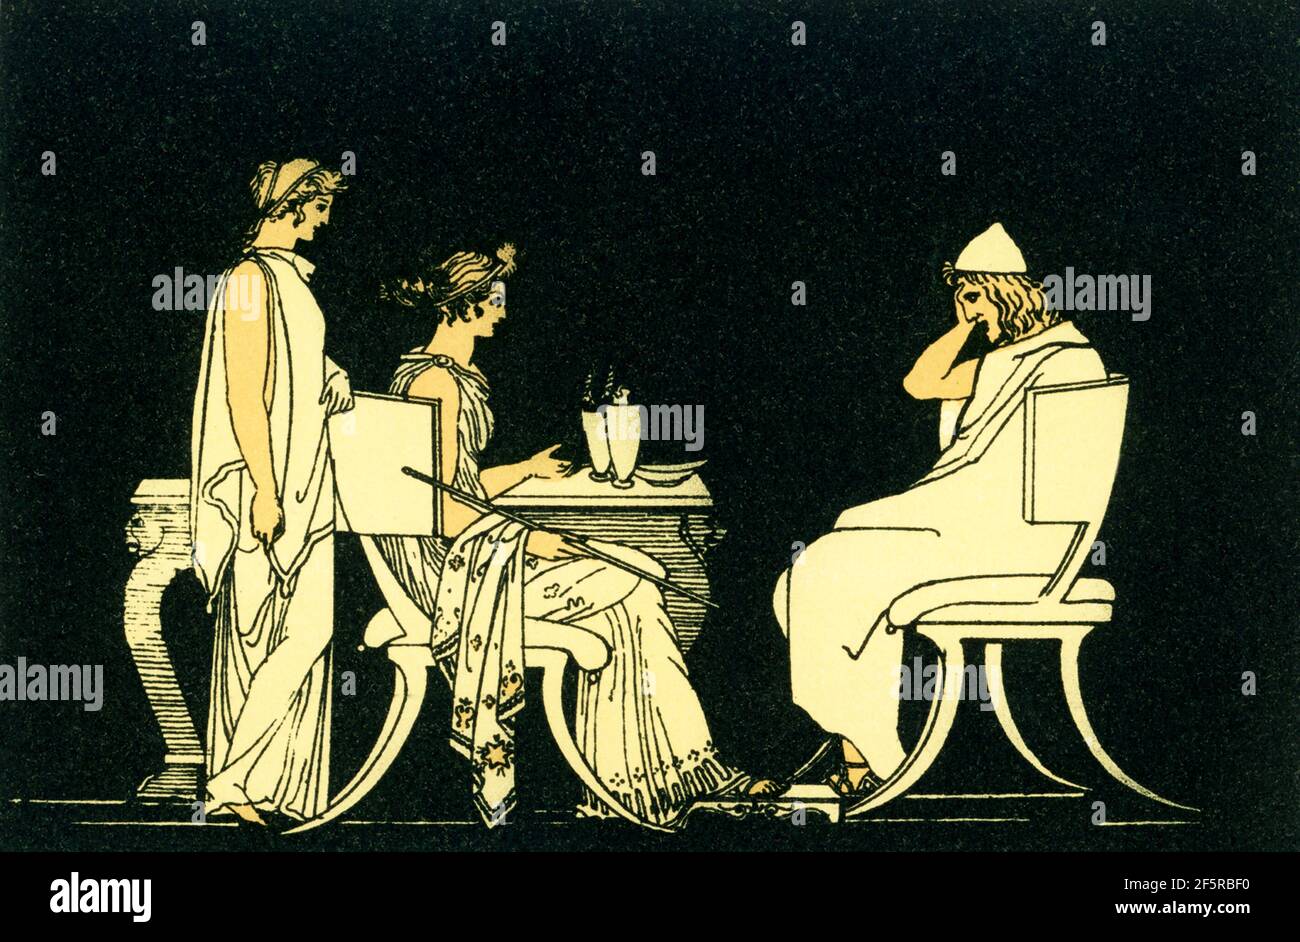 This 1880s illustration accompanied a book on Homer and his epics, the Iliad and the Odyssey. It shows the scene with the Greek hero Odysseus (Ulysses) at the table of Circe. According to ancient Greek mythology, Circe was a well-known enchantress. The daughter of Helios, she changed the companions of Odysseus into swine. Odysseus made Circe break the spell. Stock Photo